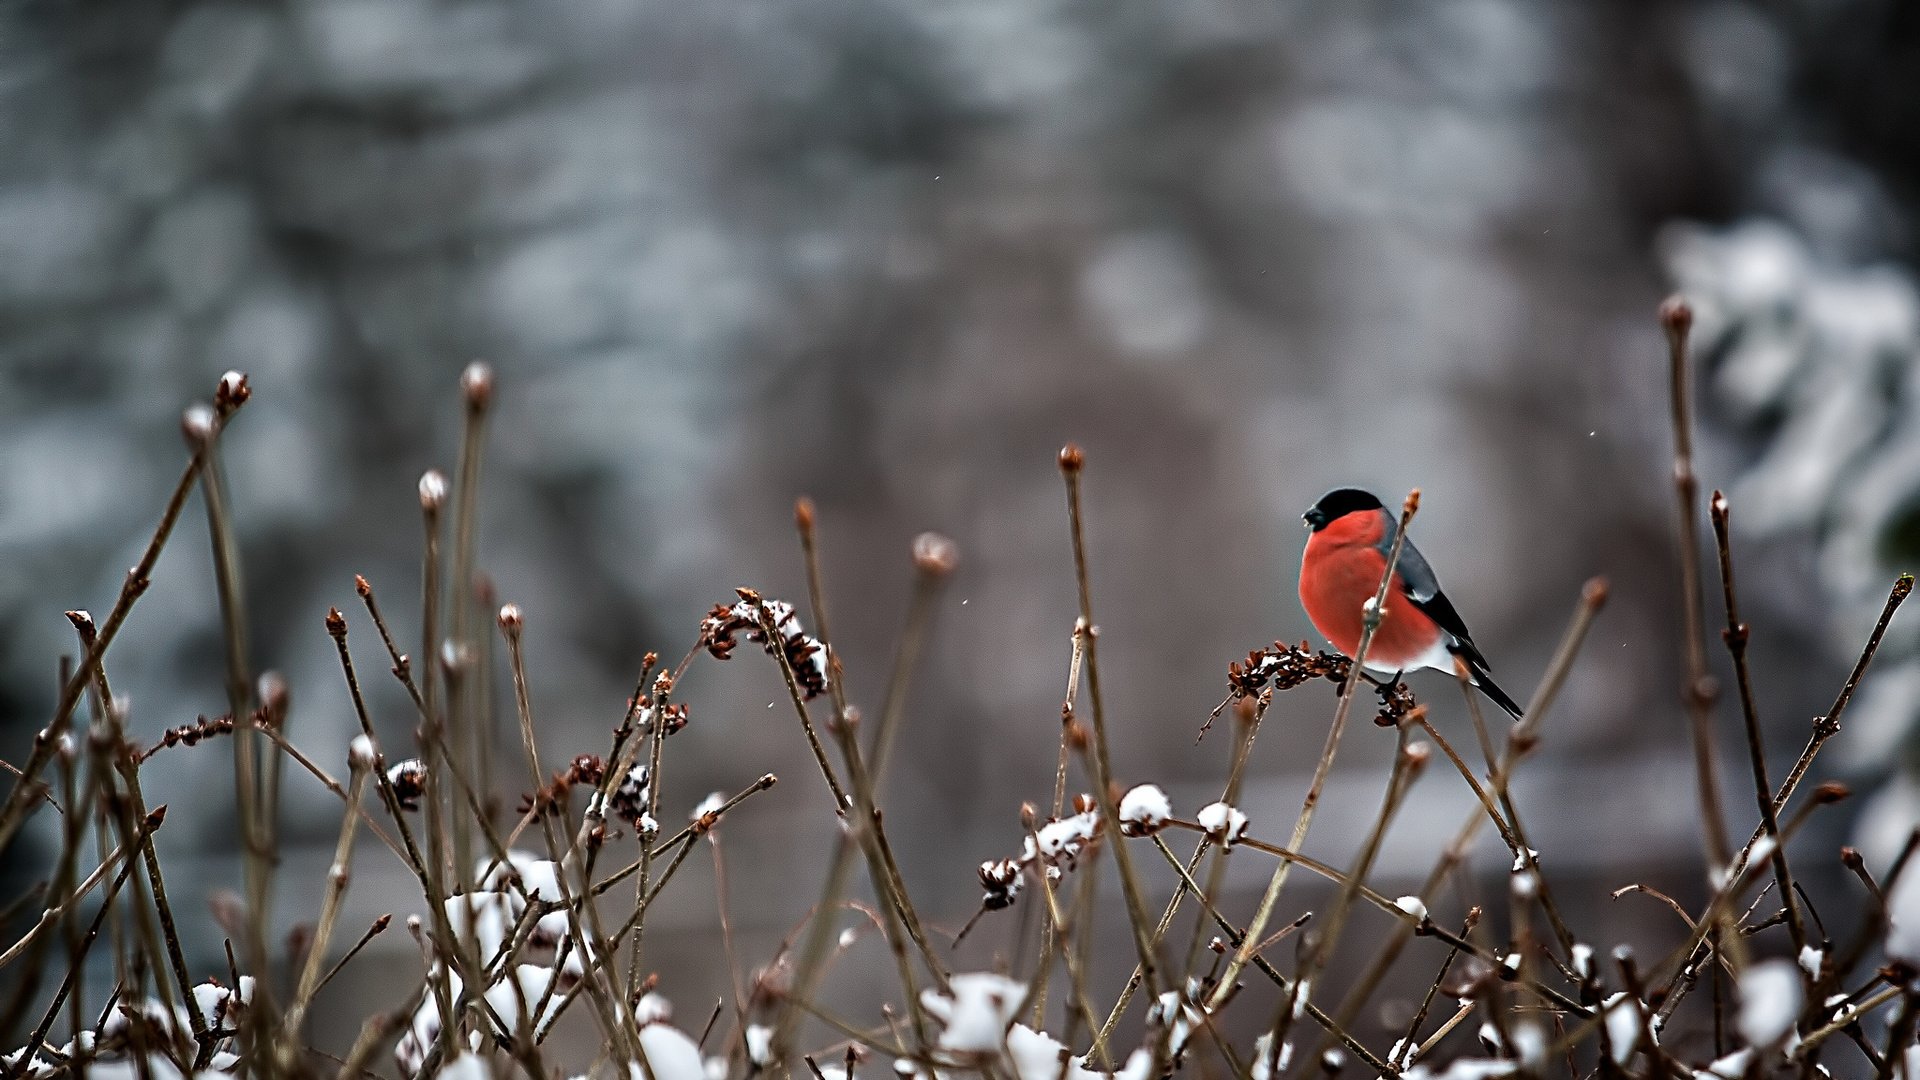 snow, Branches, Bird, Red, Animal, Winter, Snow, Nature Wallpaper